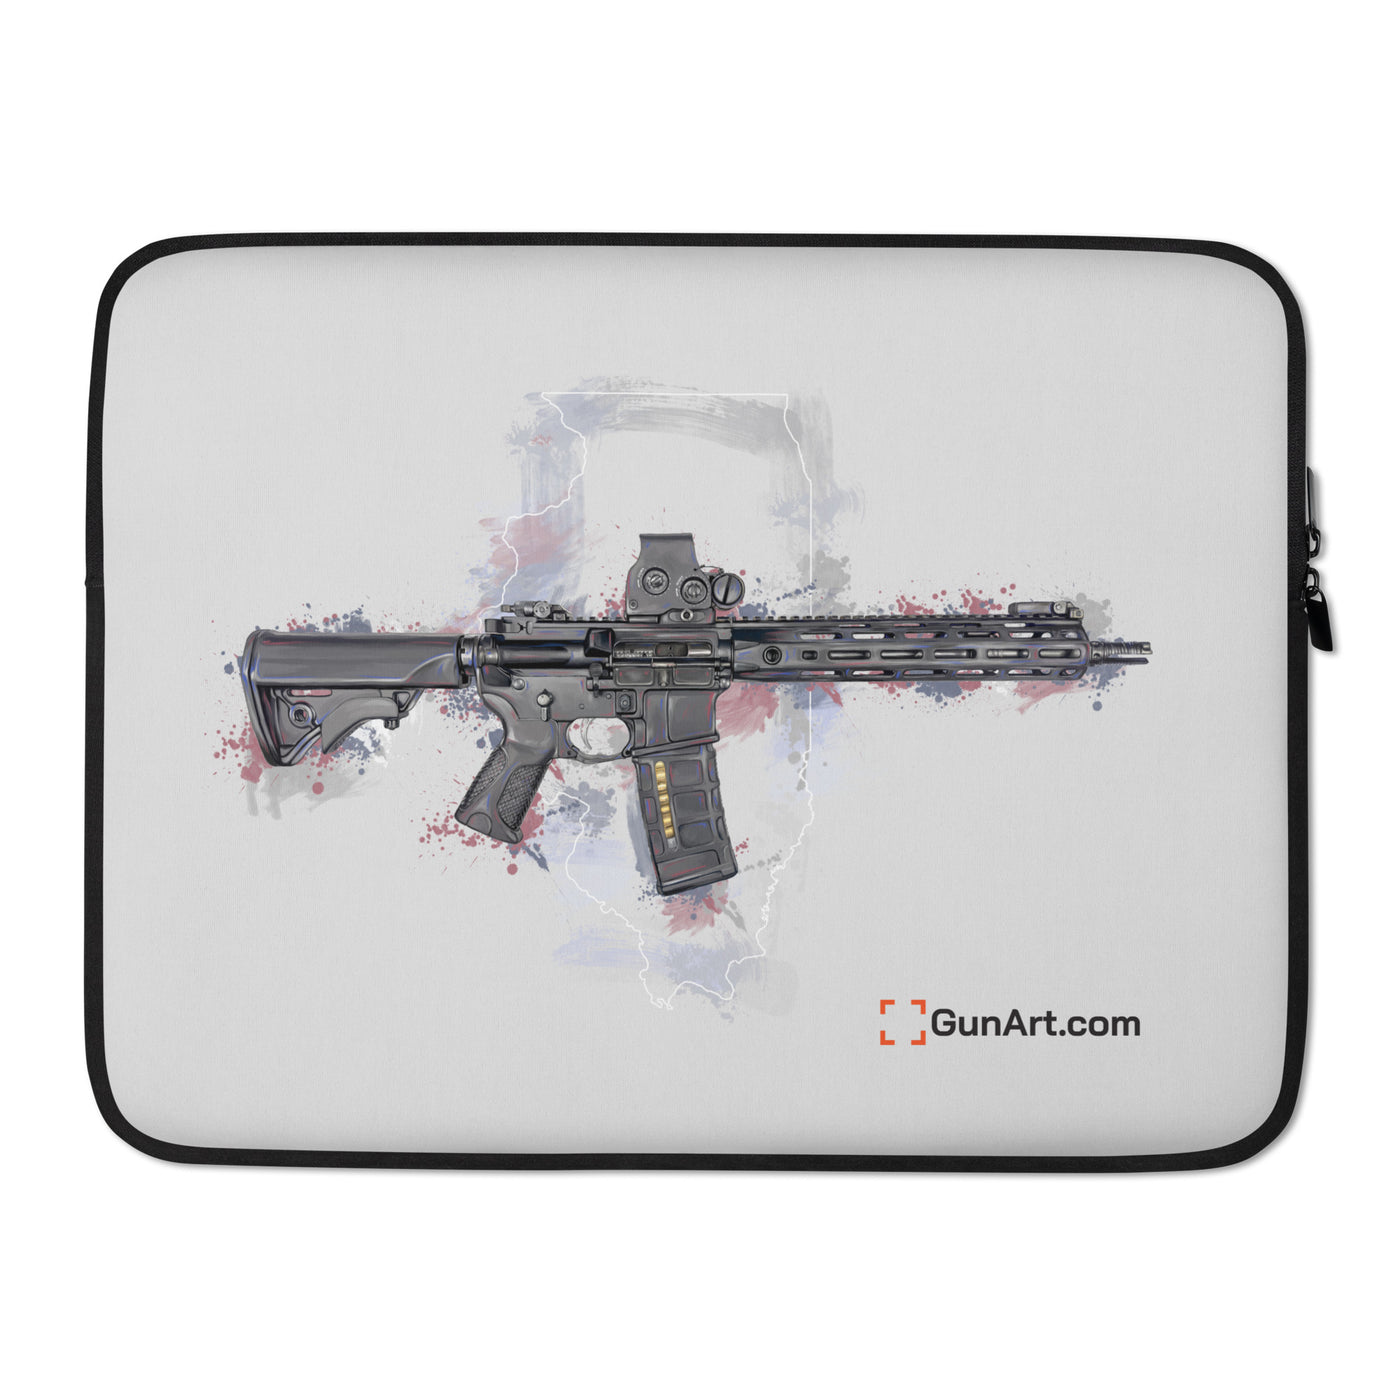 Defending Freedom - Illinois - AR-15 State Laptop Sleeve - White State